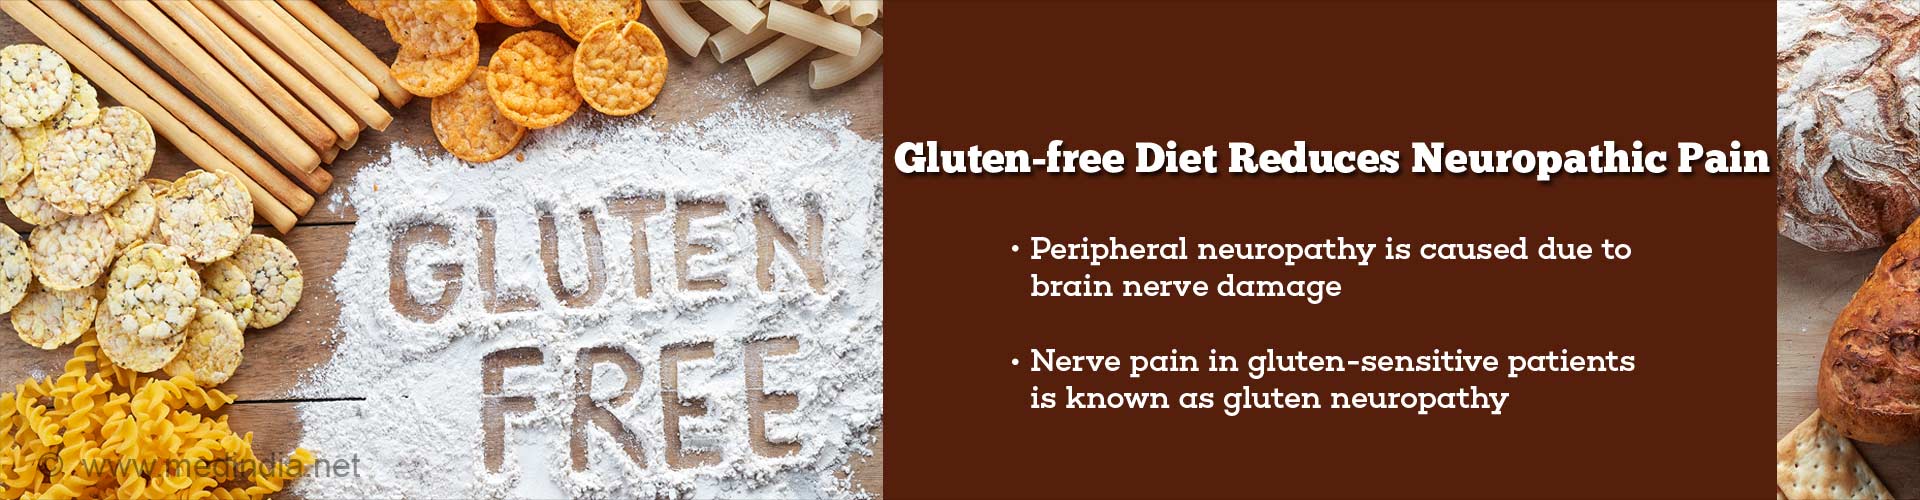 gluten-free diet reduces neuropathic pain
- peripheral neuropathy is caused due to brain nerve damage
- nerve pain in gluten-sensitive patients is known as gluten neuropathy